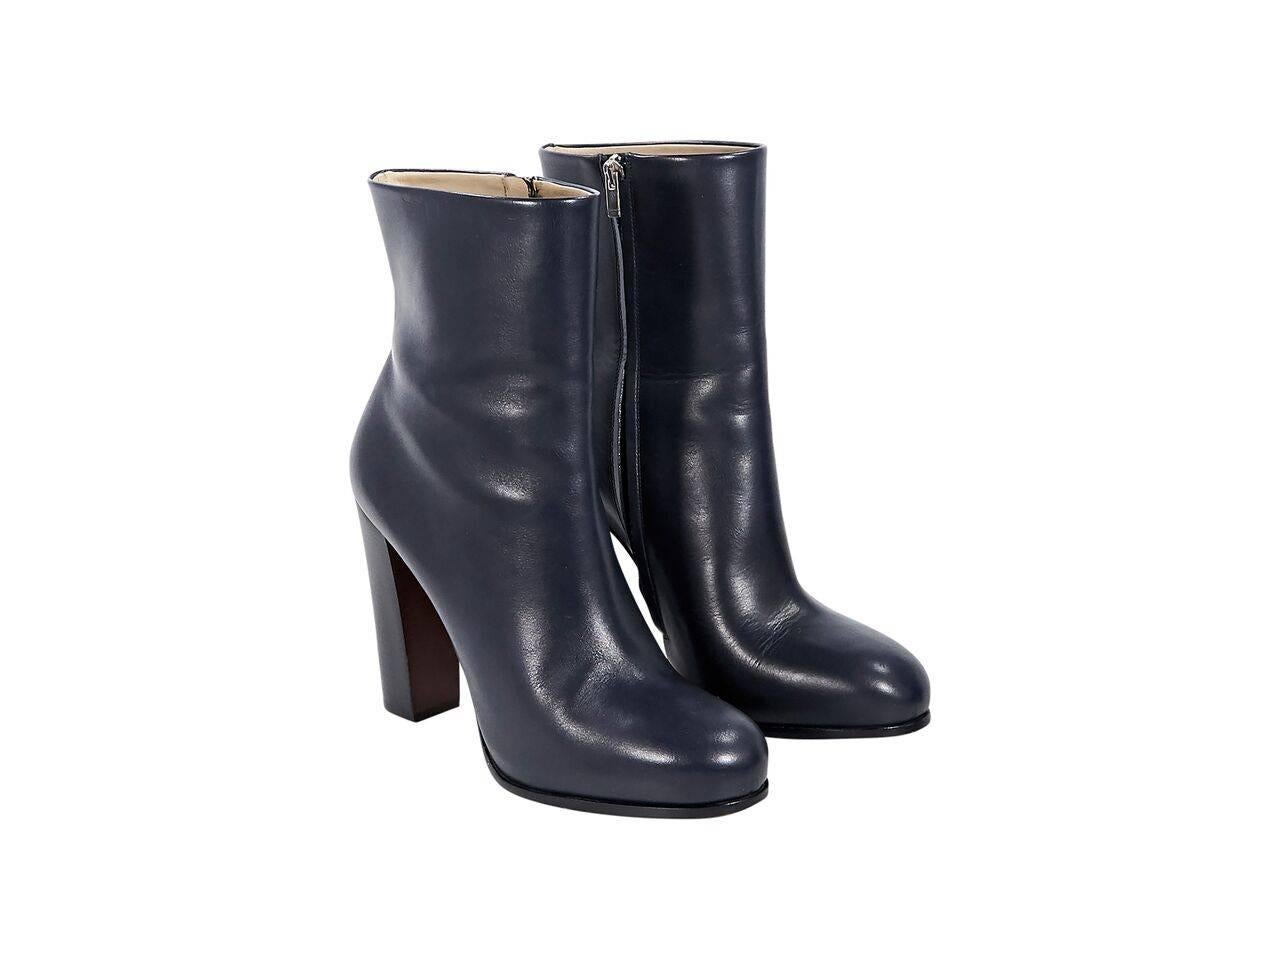 Product details:  Navy blue leather ankle boots by Celine.  Inner zip closure.  Round toe.  Block stacked heel.  
Condition: Pre-owned. Very good.
Est. Retail $ 1,575.00